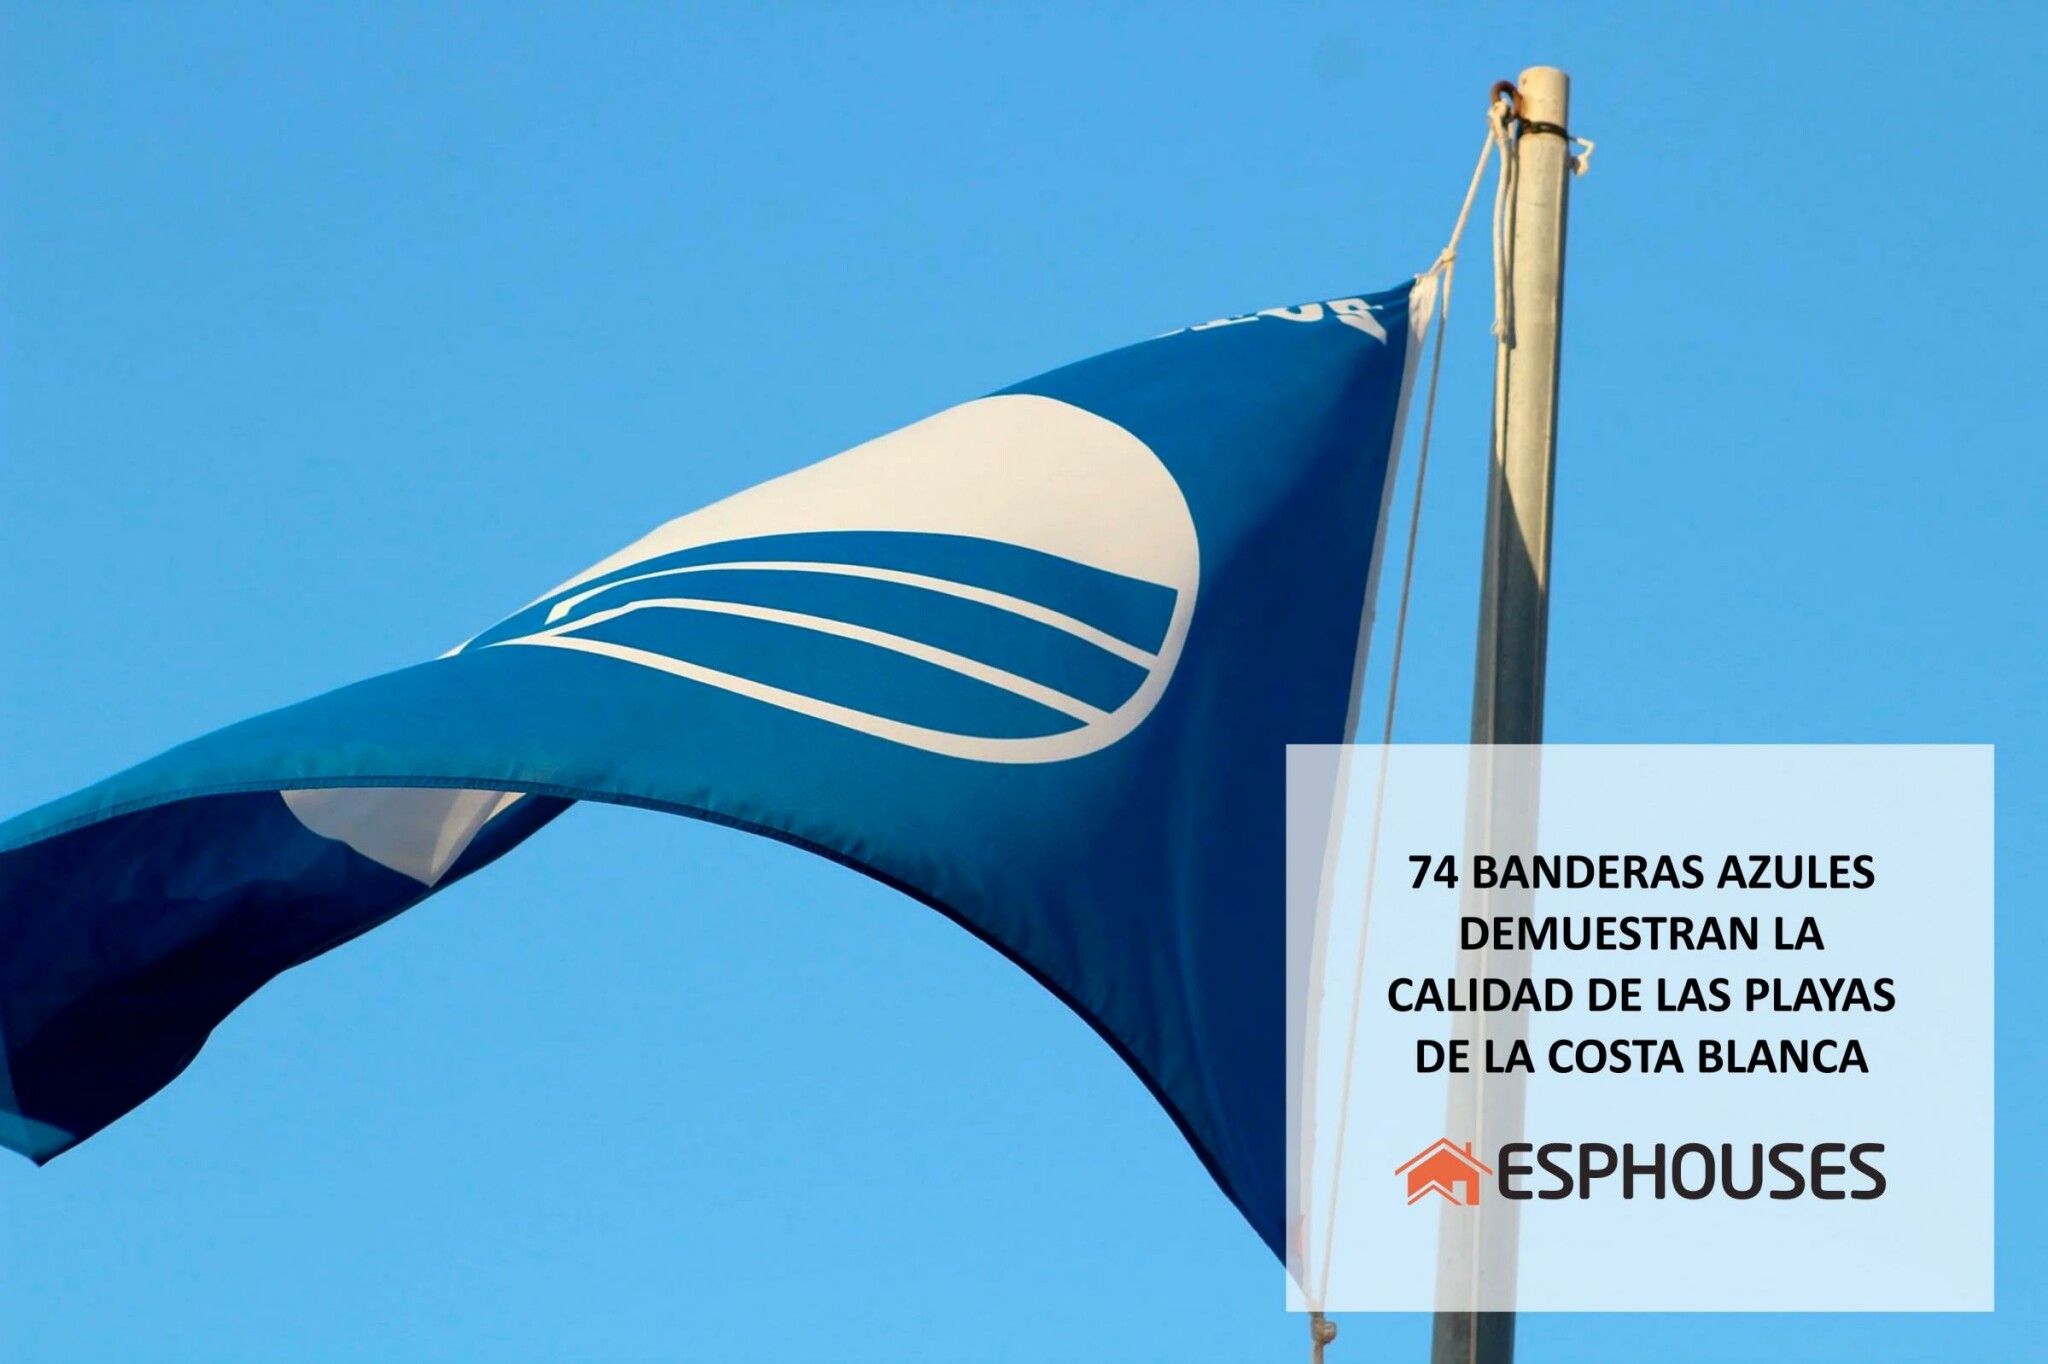 74 blue flags demonstrate the high quality of Costa Blanca beaches in 2021